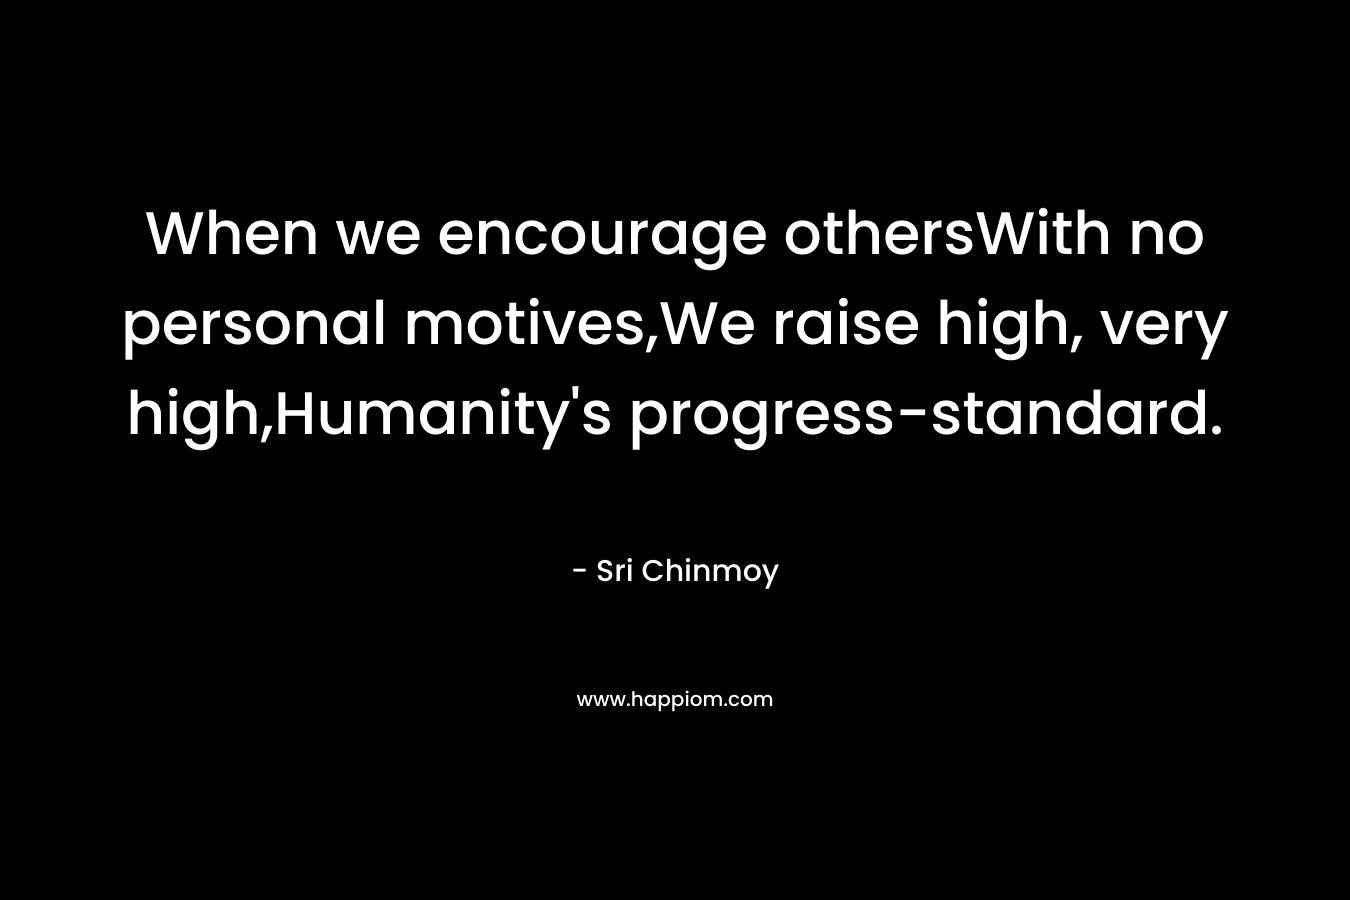 When we encourage othersWith no personal motives,We raise high, very high,Humanity's progress-standard.